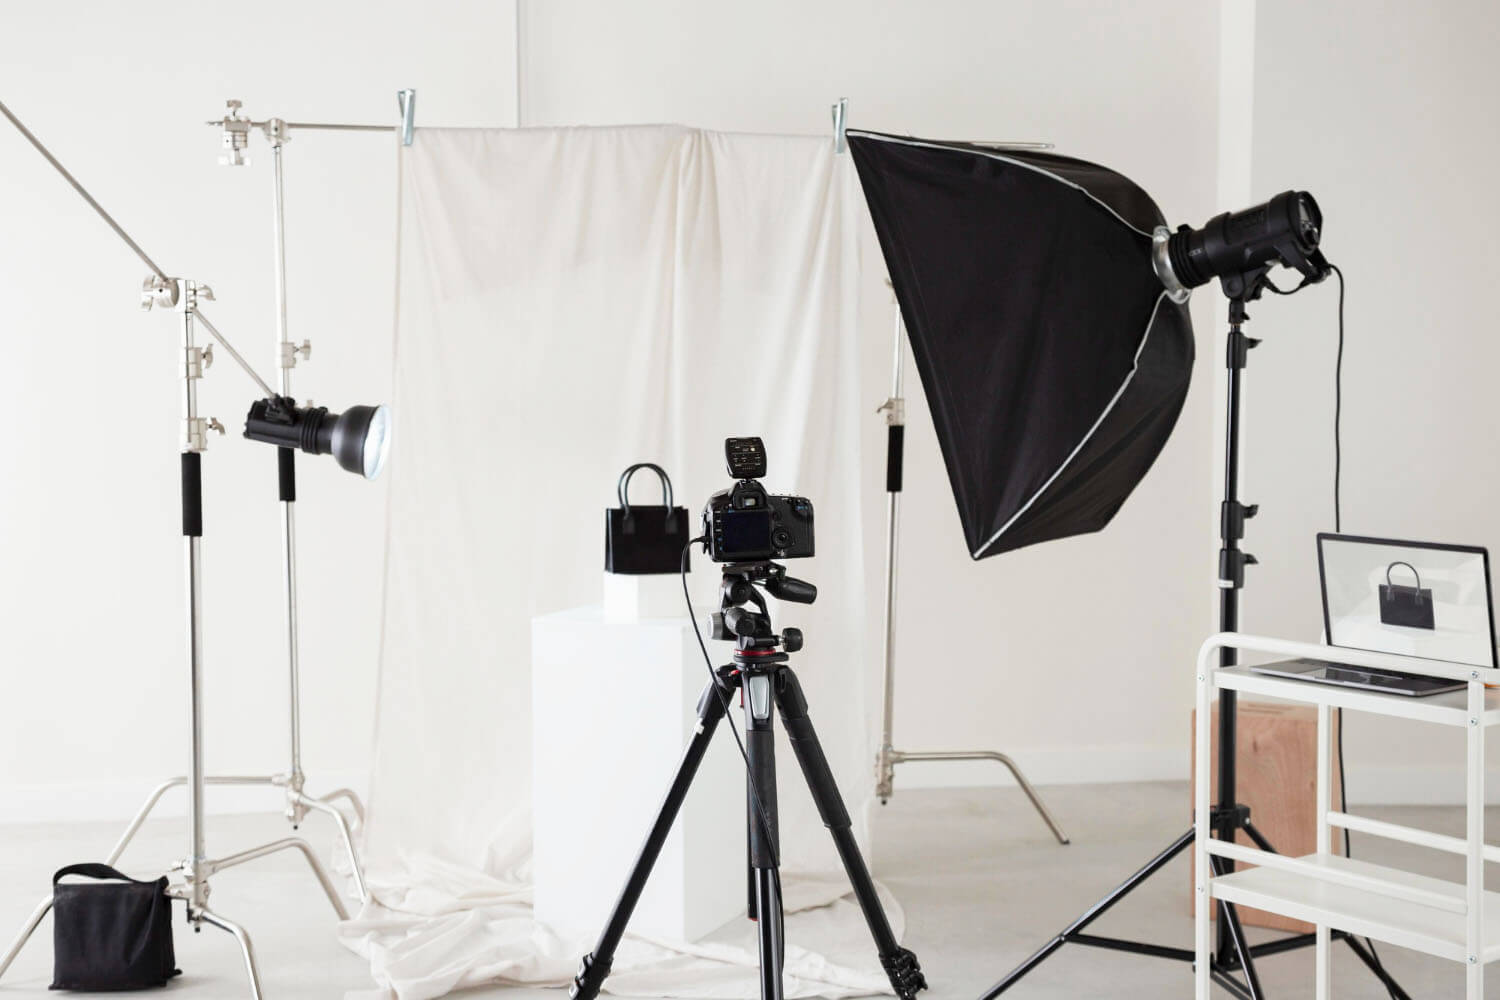 What Pieces of Equipment Do You Need For Product Photography?